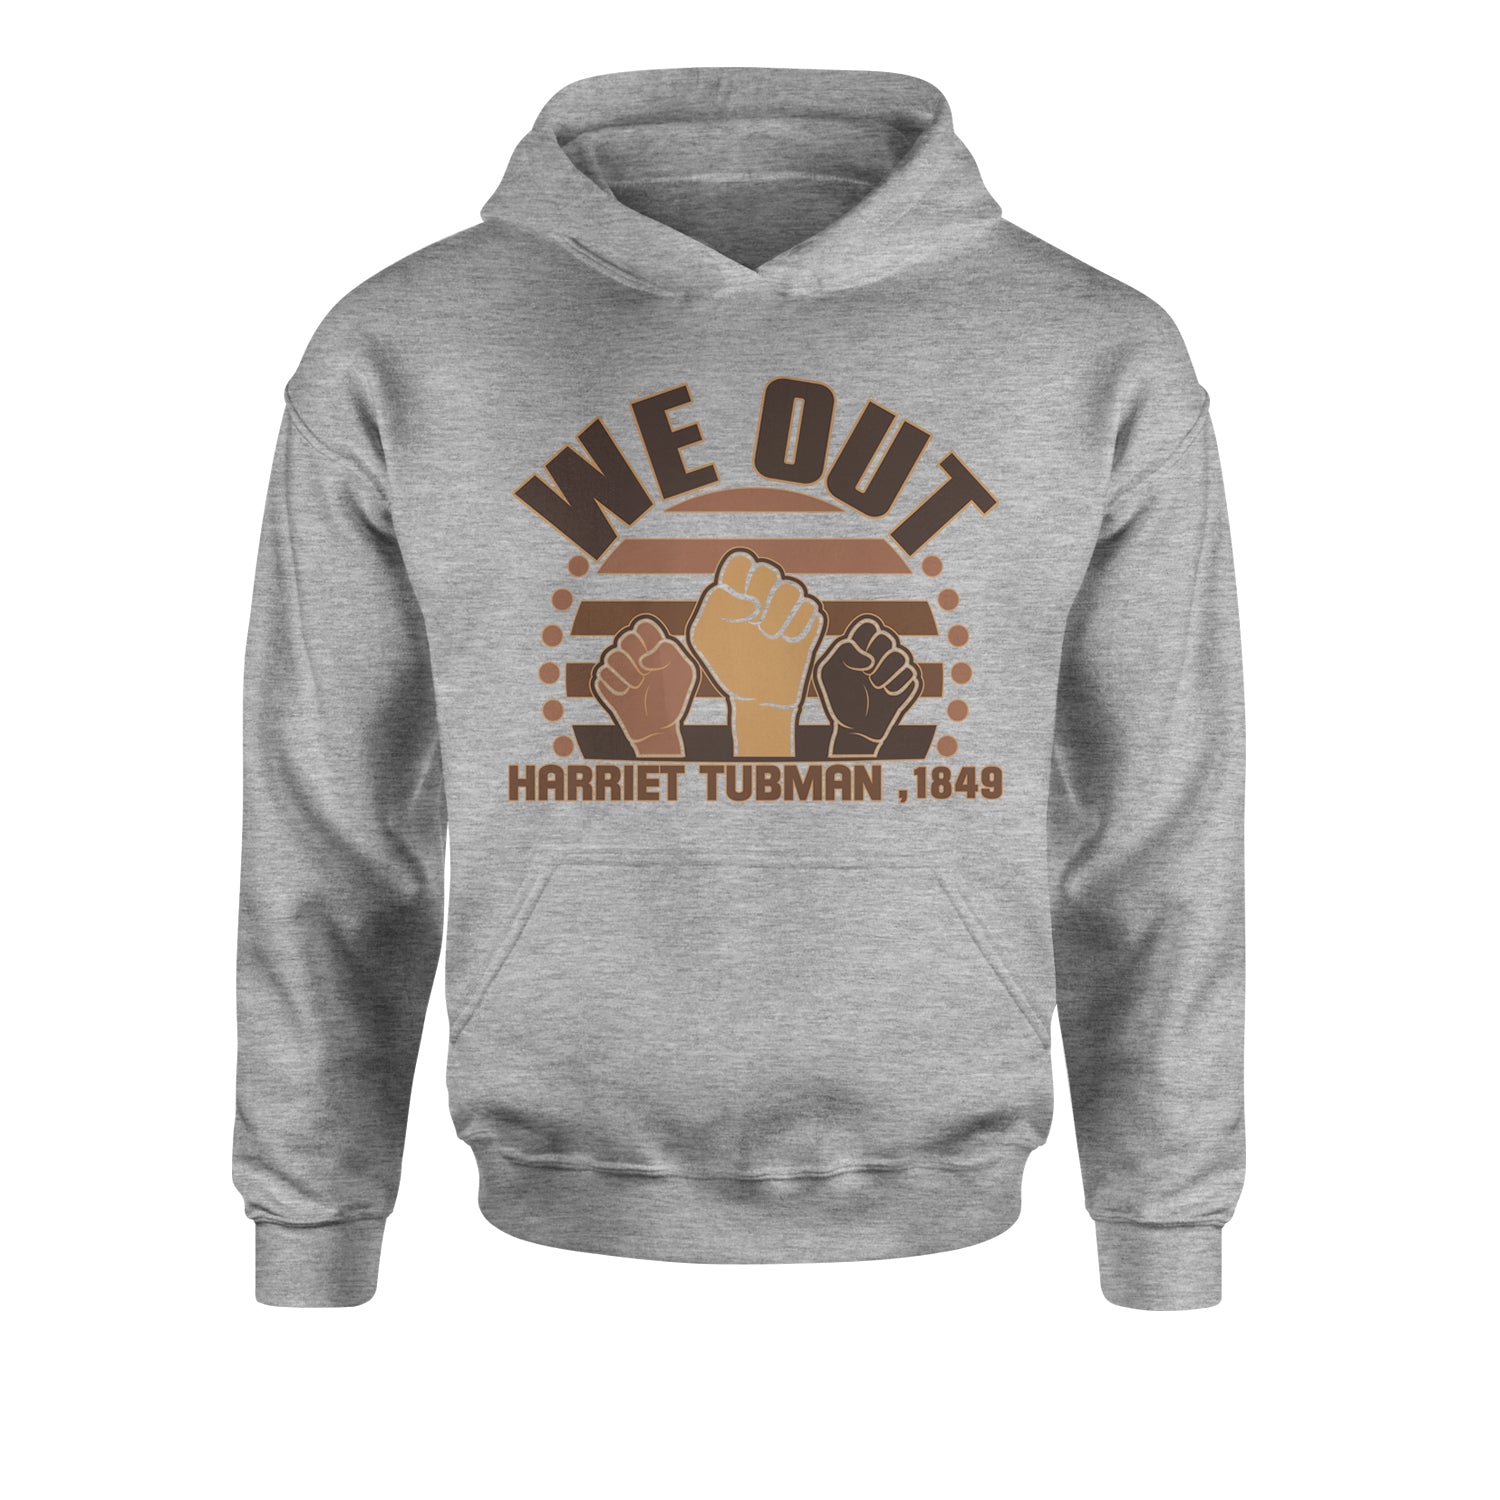 We Out Harriet Tubman Raised Fists BLM Youth-Sized Hoodie african, american, black, blm, harriet, harriett, lives, matter, out, shirt, tubman, we by Expression Tees